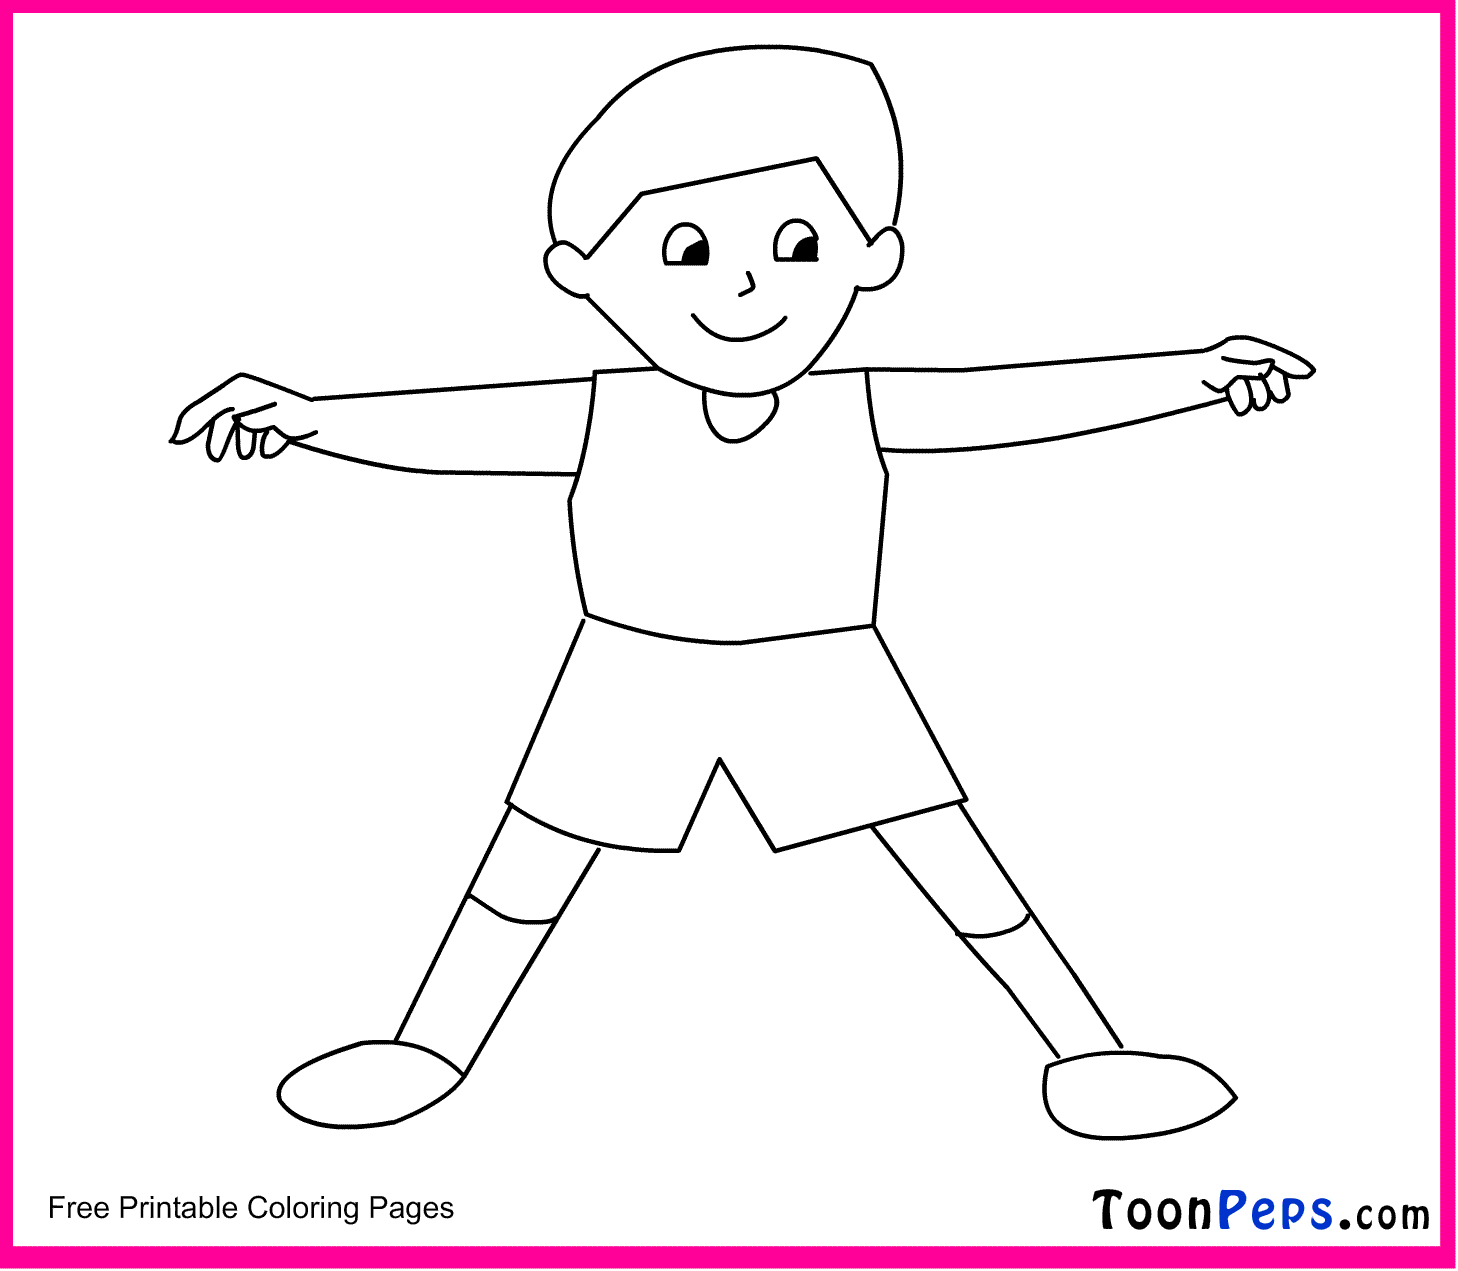 Free Printable Human Body Coloring Pages - High Quality Coloring Pages